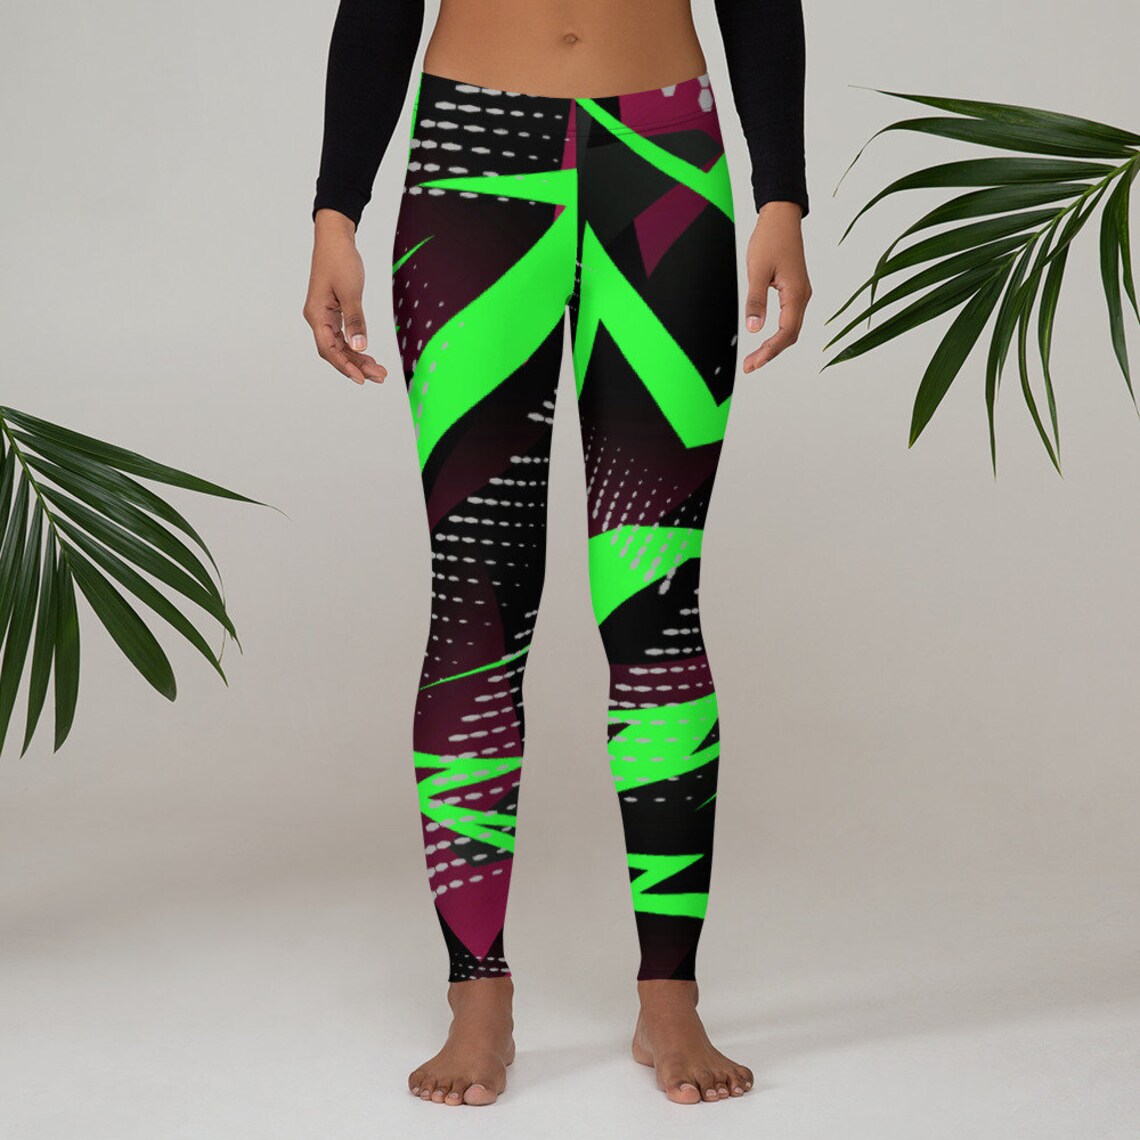 Colorful Soft Neon Leggings Stretchy Fluro Shiny Pants for Gym